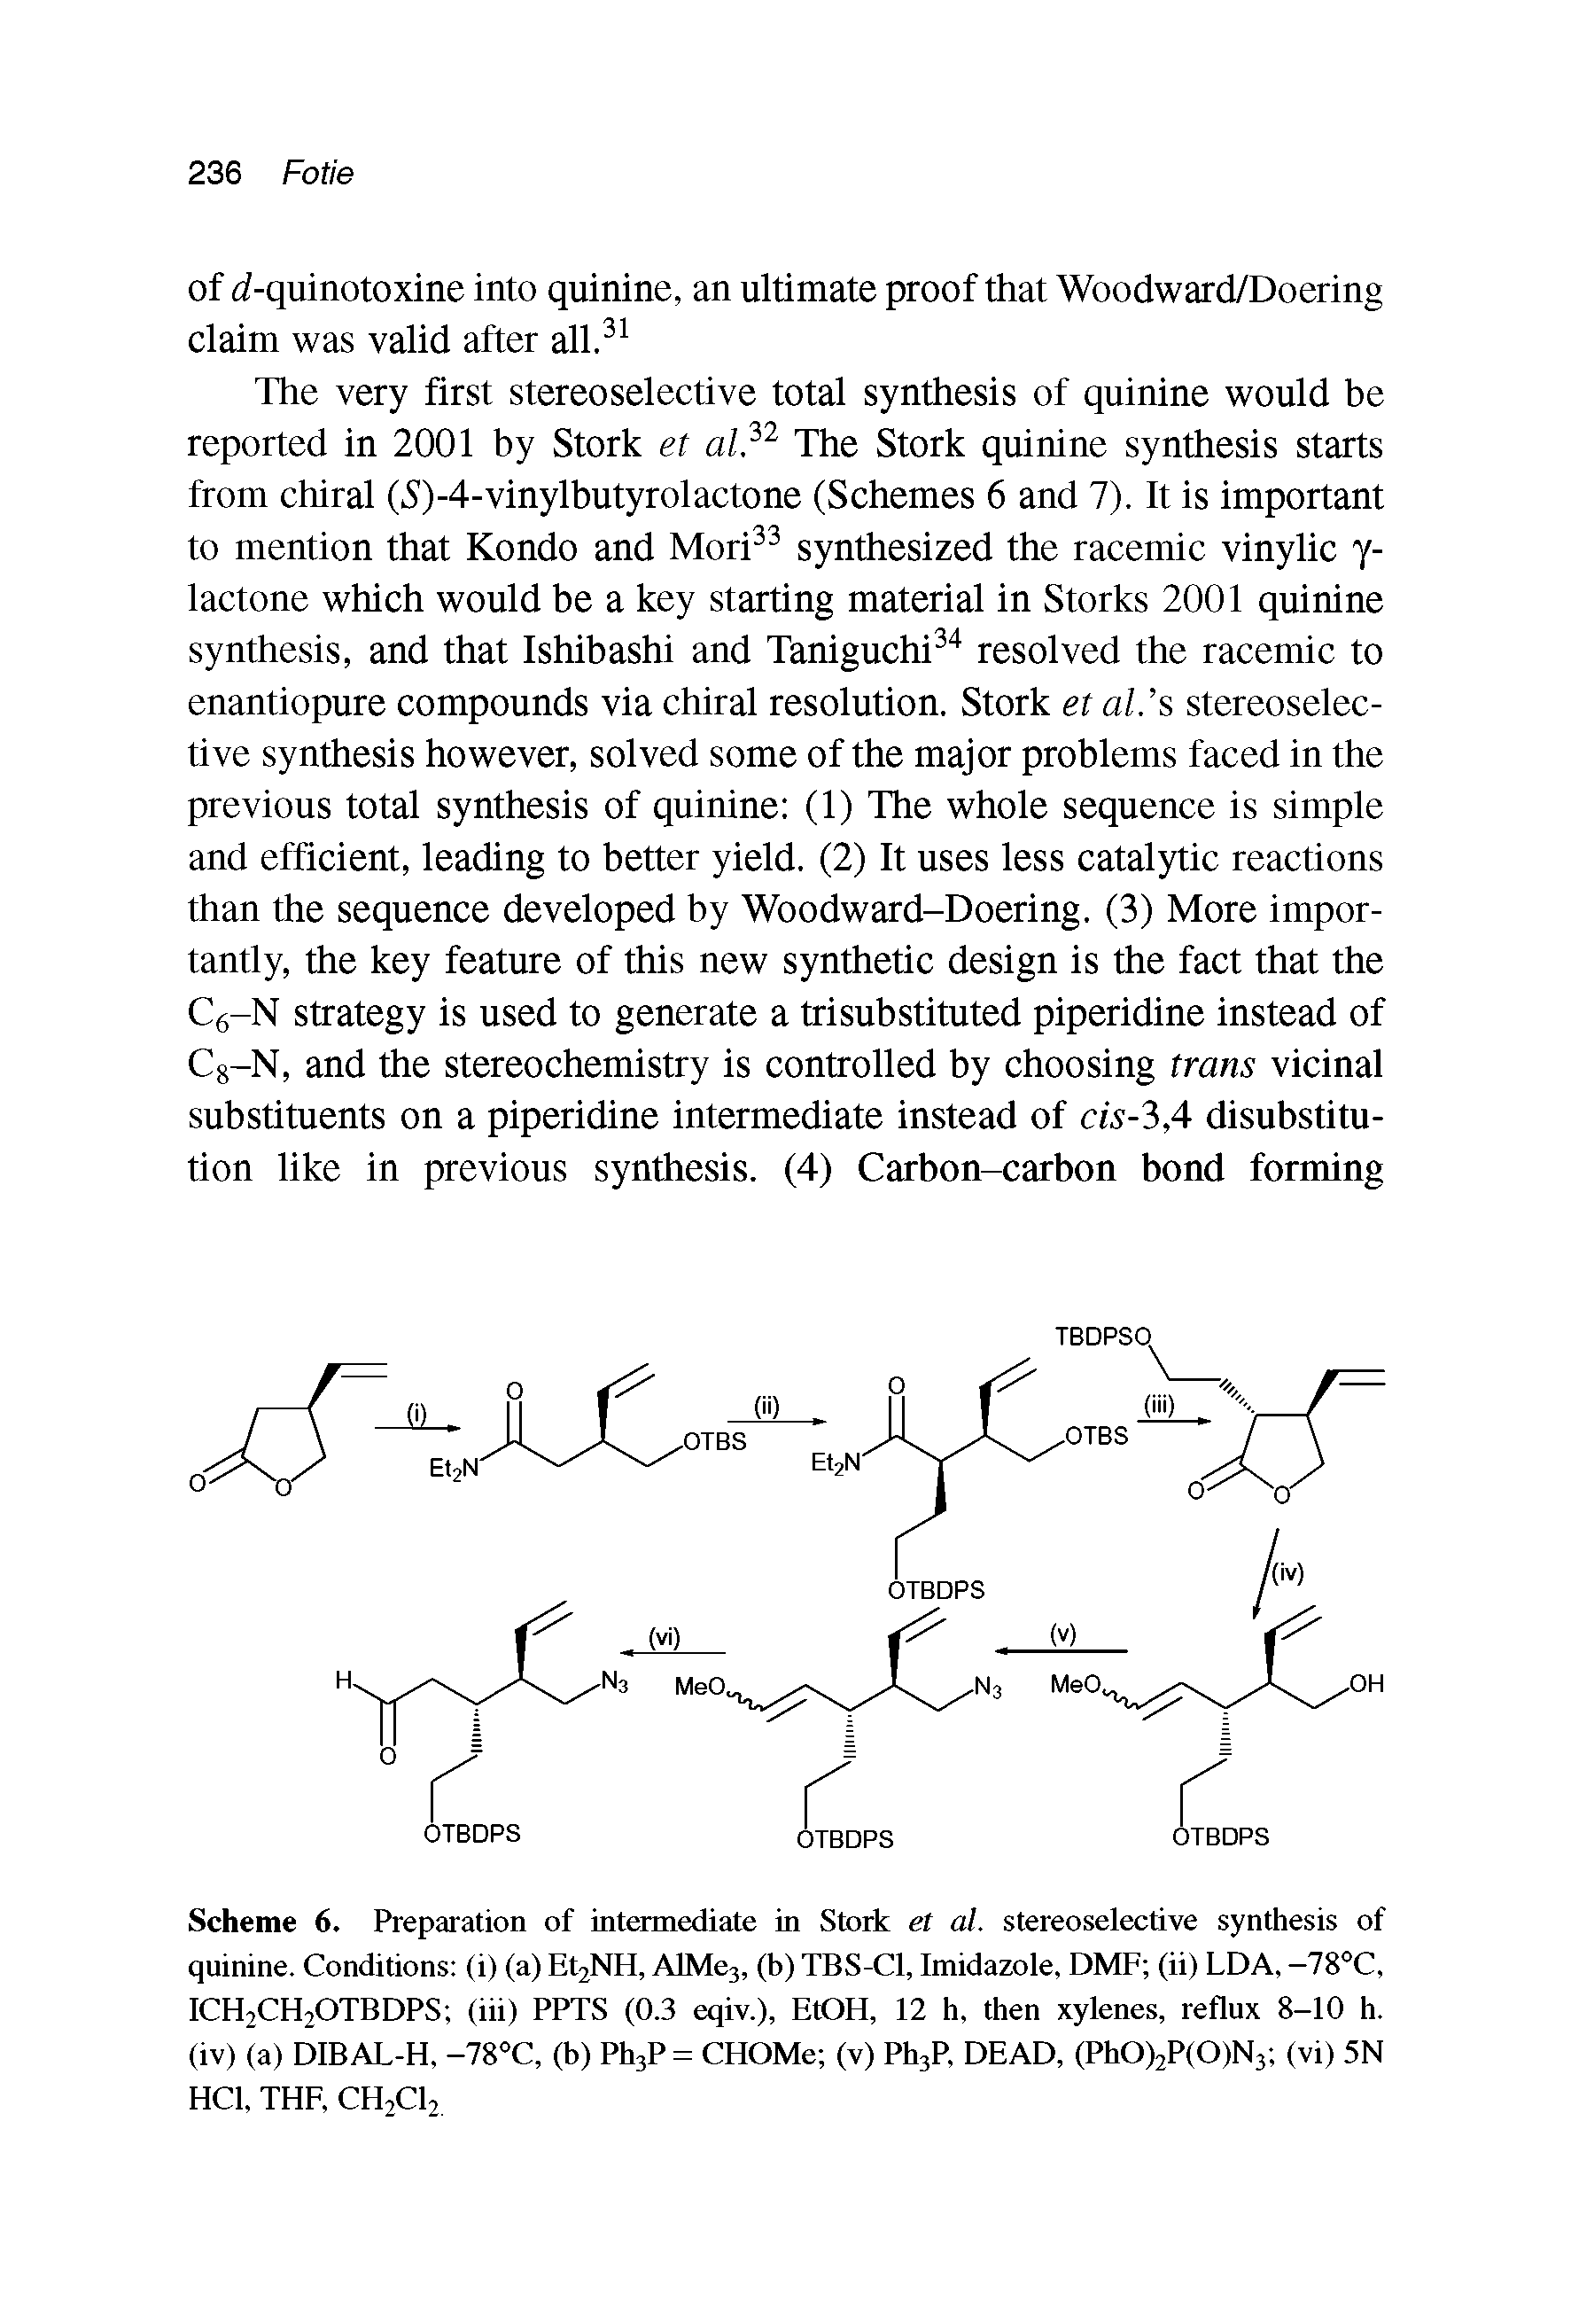 Scheme 6. Preparation of intermediate in Stork et al. stereoselective synthesis of quinine. Conditions (i) (a) Et2NH, AlMe3, (b) TBS-Cl, Imidazole, DMF (ii) LDA, -78°C, ICH2CH2OTBDPS (iii) PPTS (0.3 eqiv.), EtOH, 12 h, then xylenes, reflux 8-10 h. (iv) (a) DIBAL-H, -78°C, (b) PhjP = CHOMe (v) PhjP, DEAD, (PhOtjPlOlNj (vi) 5N HCl, THE, CH2CI2...